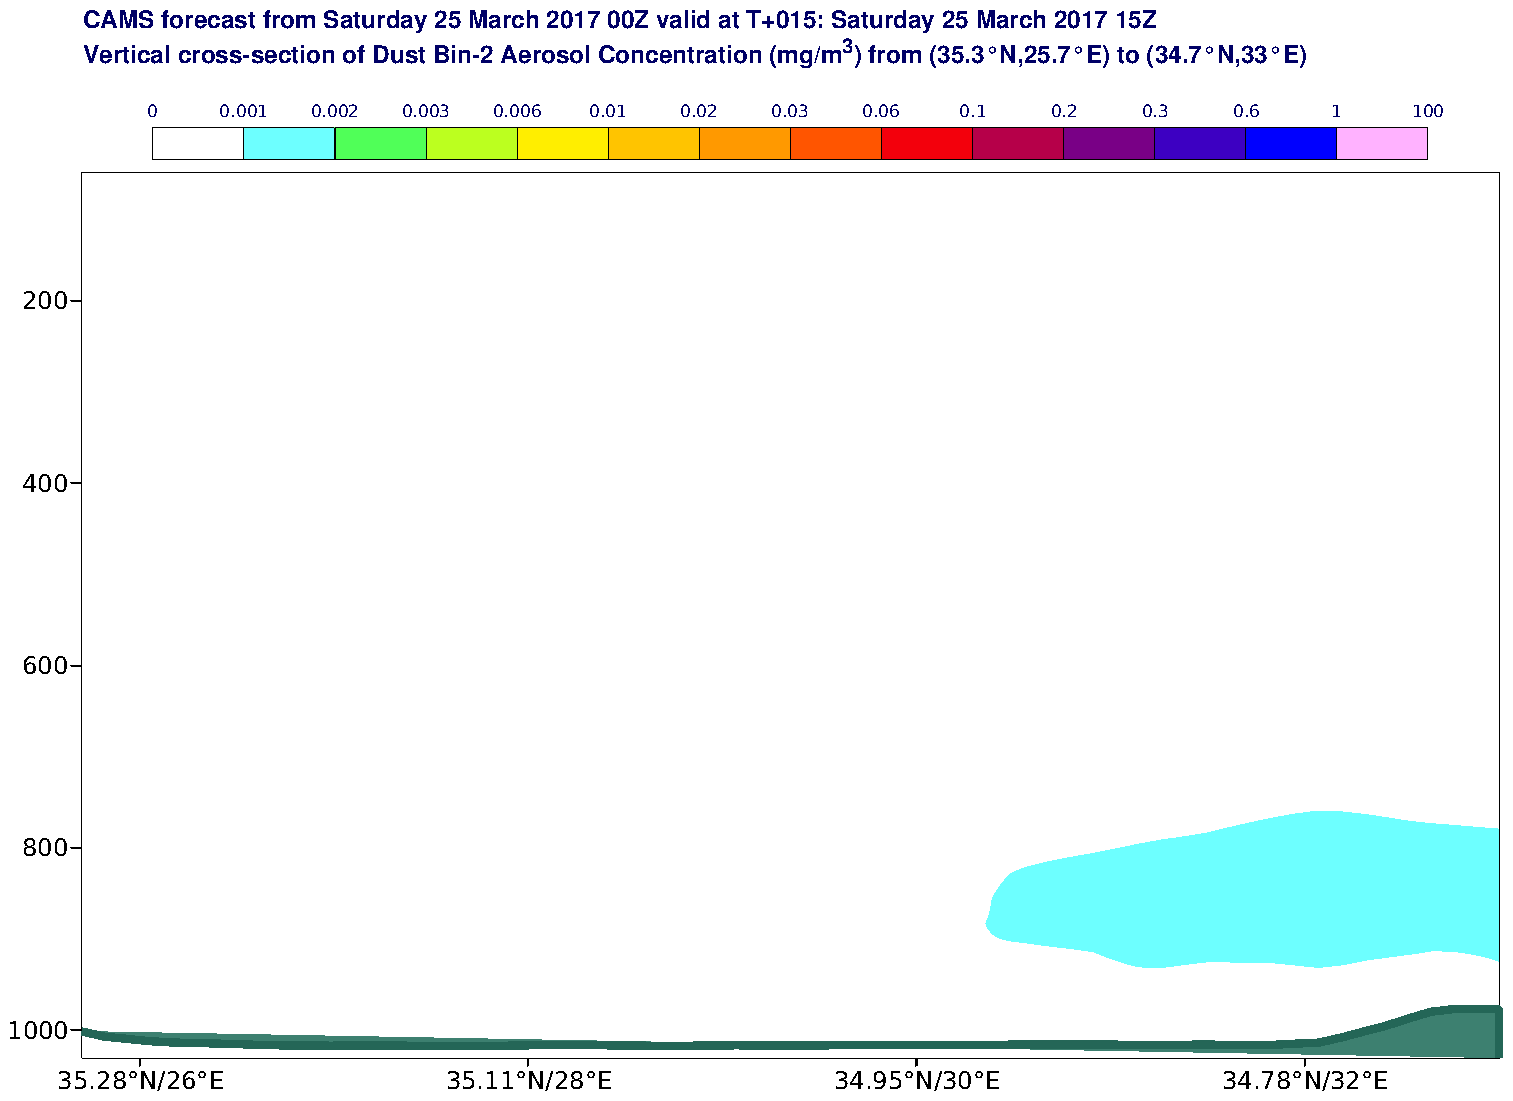 Vertical cross-section of Dust Bin-2 Aerosol Concentration (mg/m3) valid at T15 - 2017-03-25 15:00